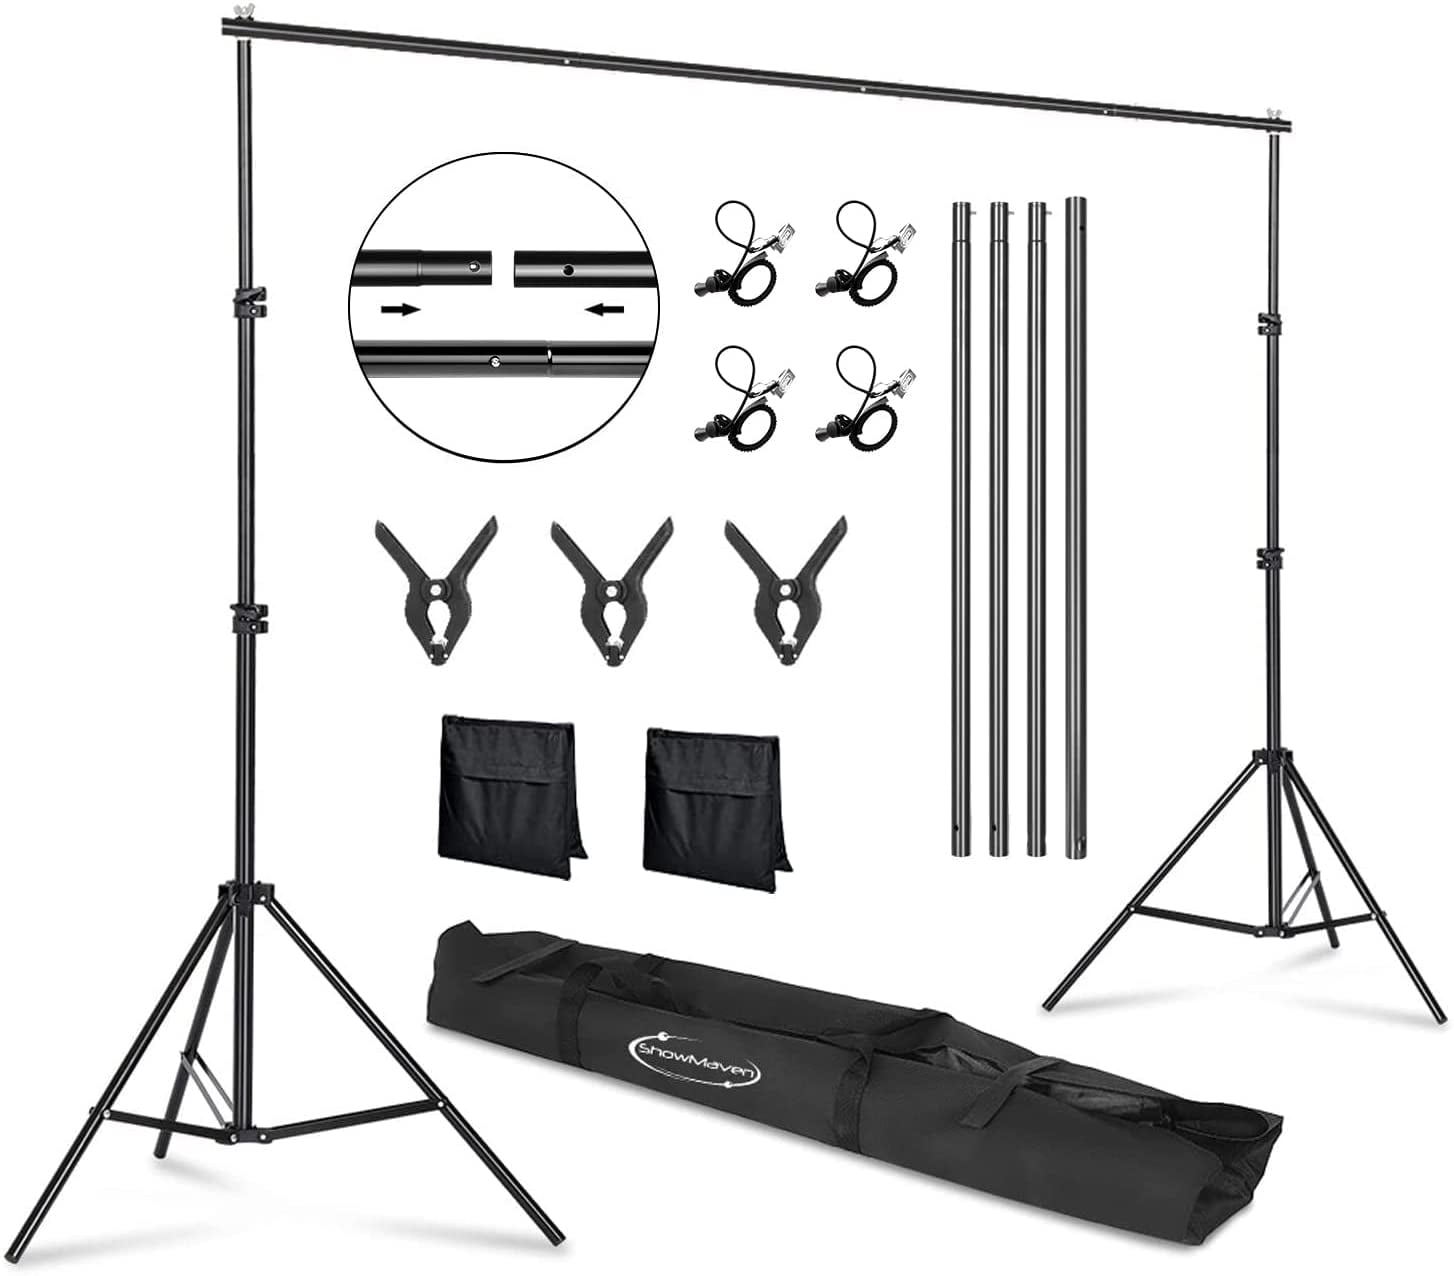 Free Clips BalsaCircle 8 ft x 10 ft Photo Video Studio Adjustable Backdrop Stand Kit Background Support System Wedding Photography 